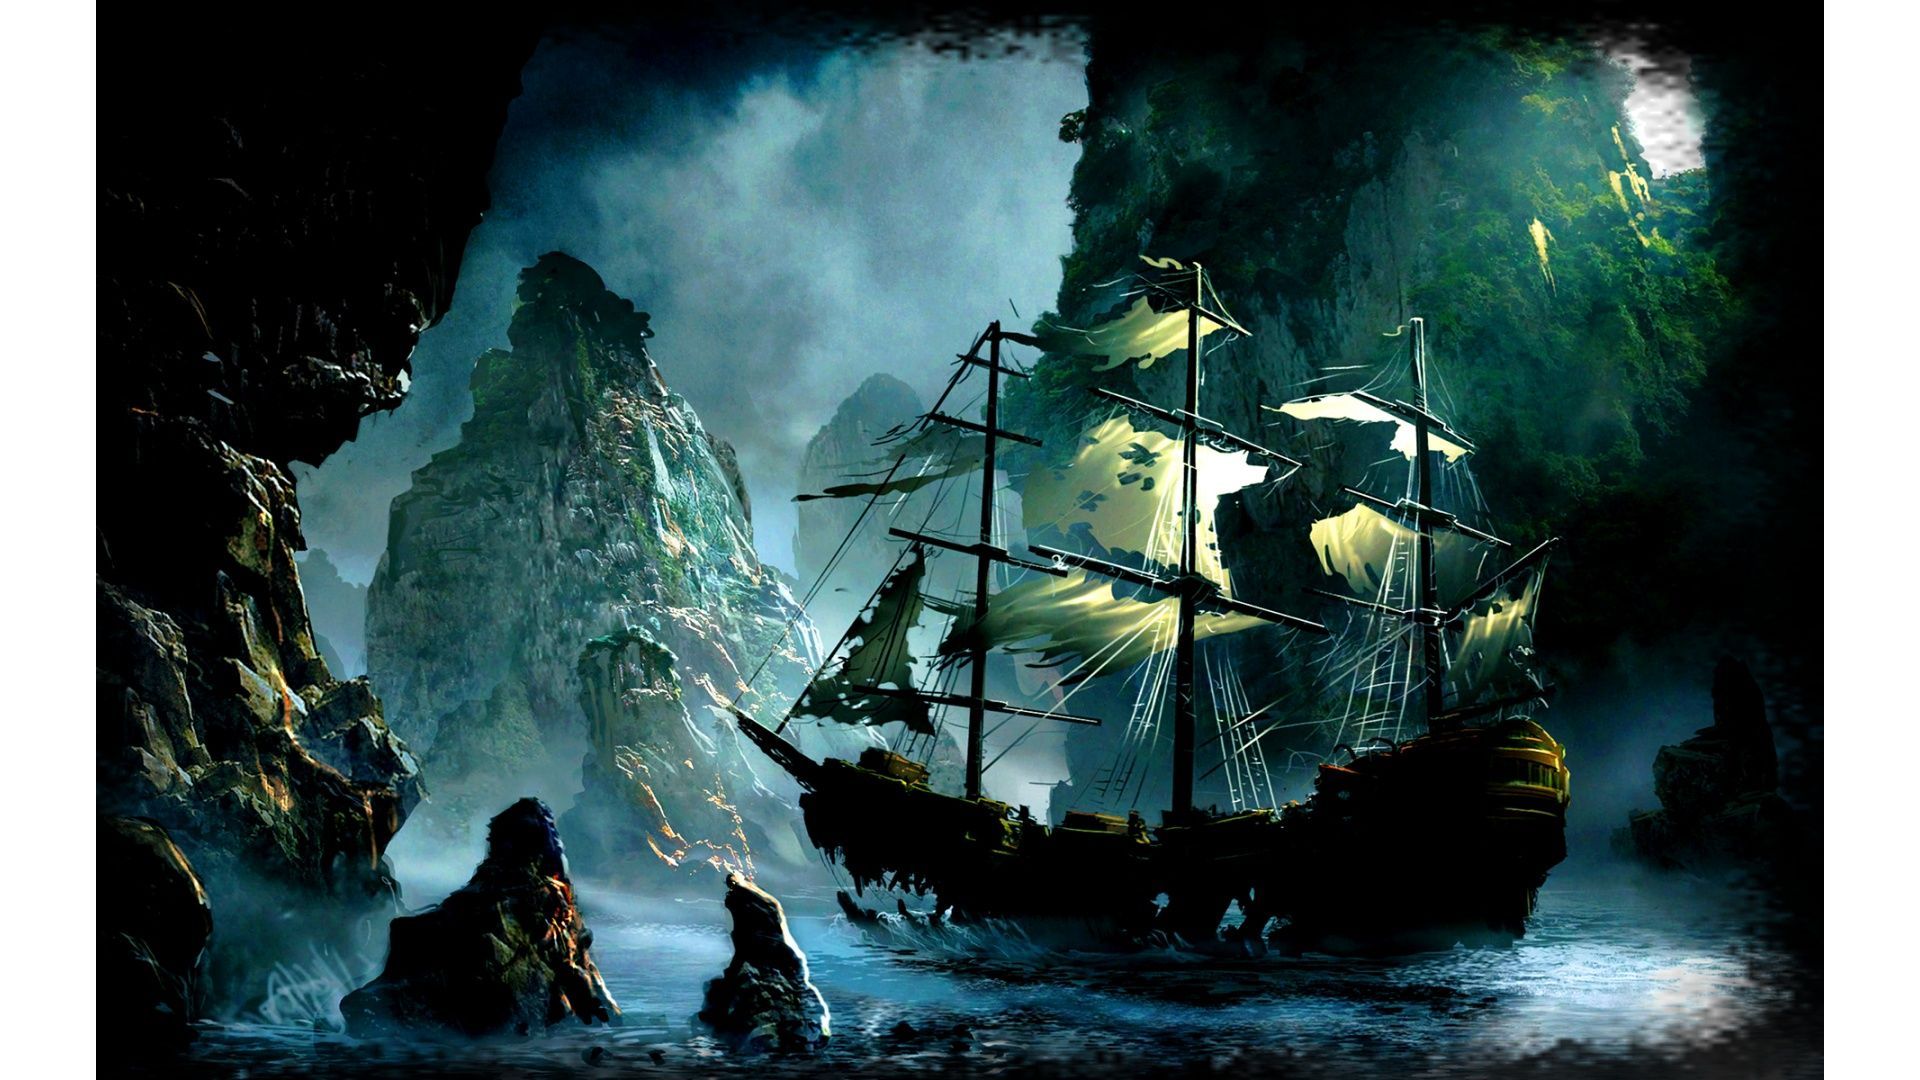 Wallpaperres.com | Pirate Ship Backgrounds 11